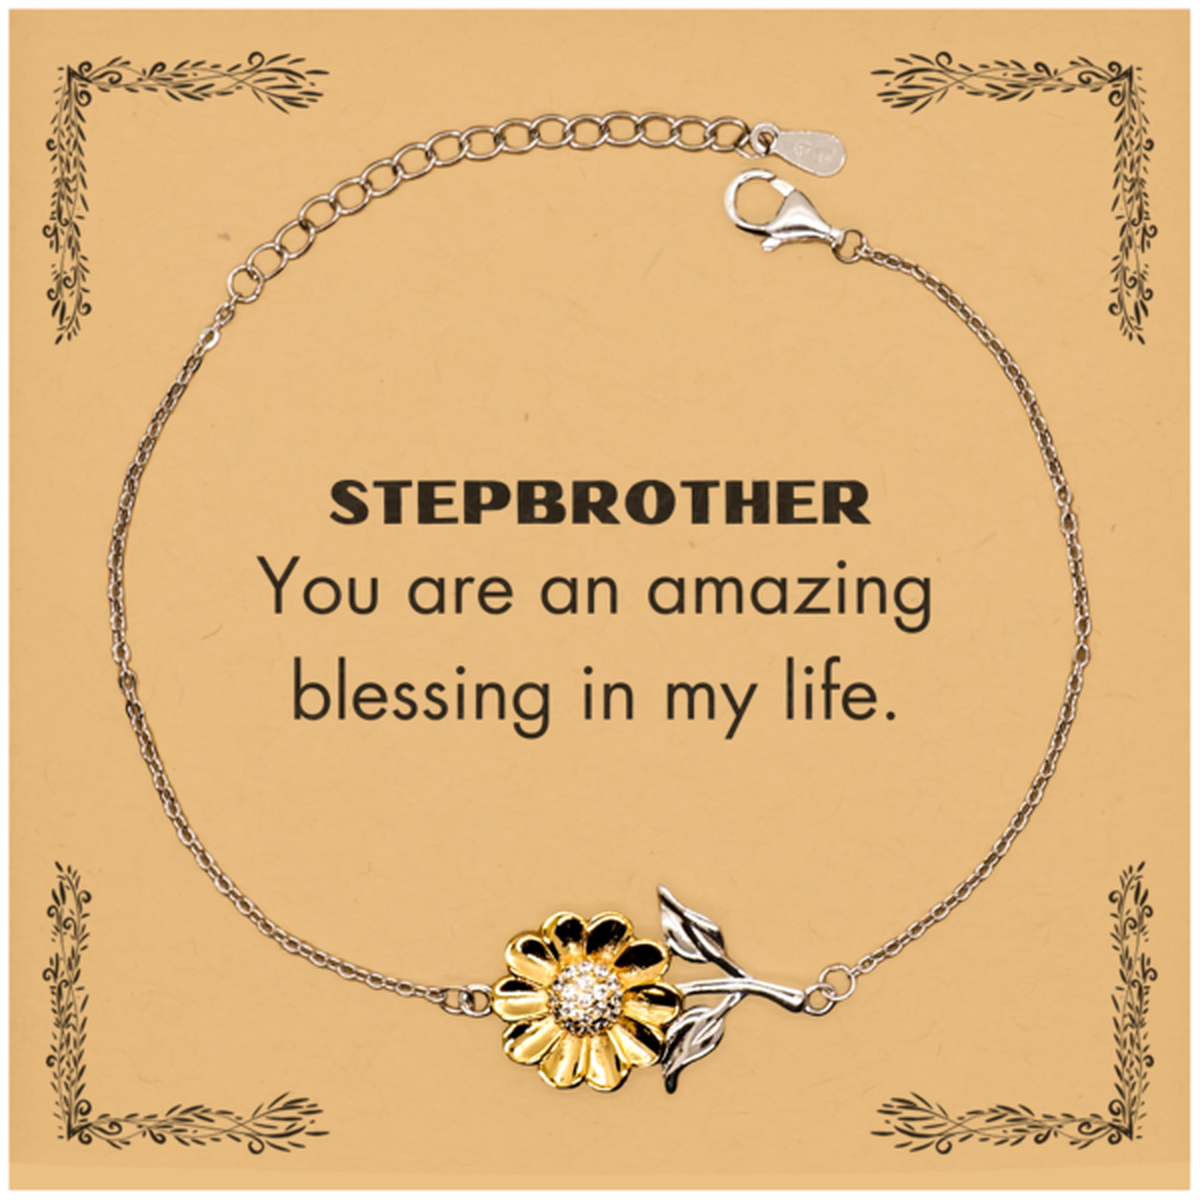 Stepbrother Sunflower Bracelet, You are an amazing blessing in my life, Thank You Gifts For Stepbrother, Inspirational Birthday Christmas Unique Gifts For Stepbrother